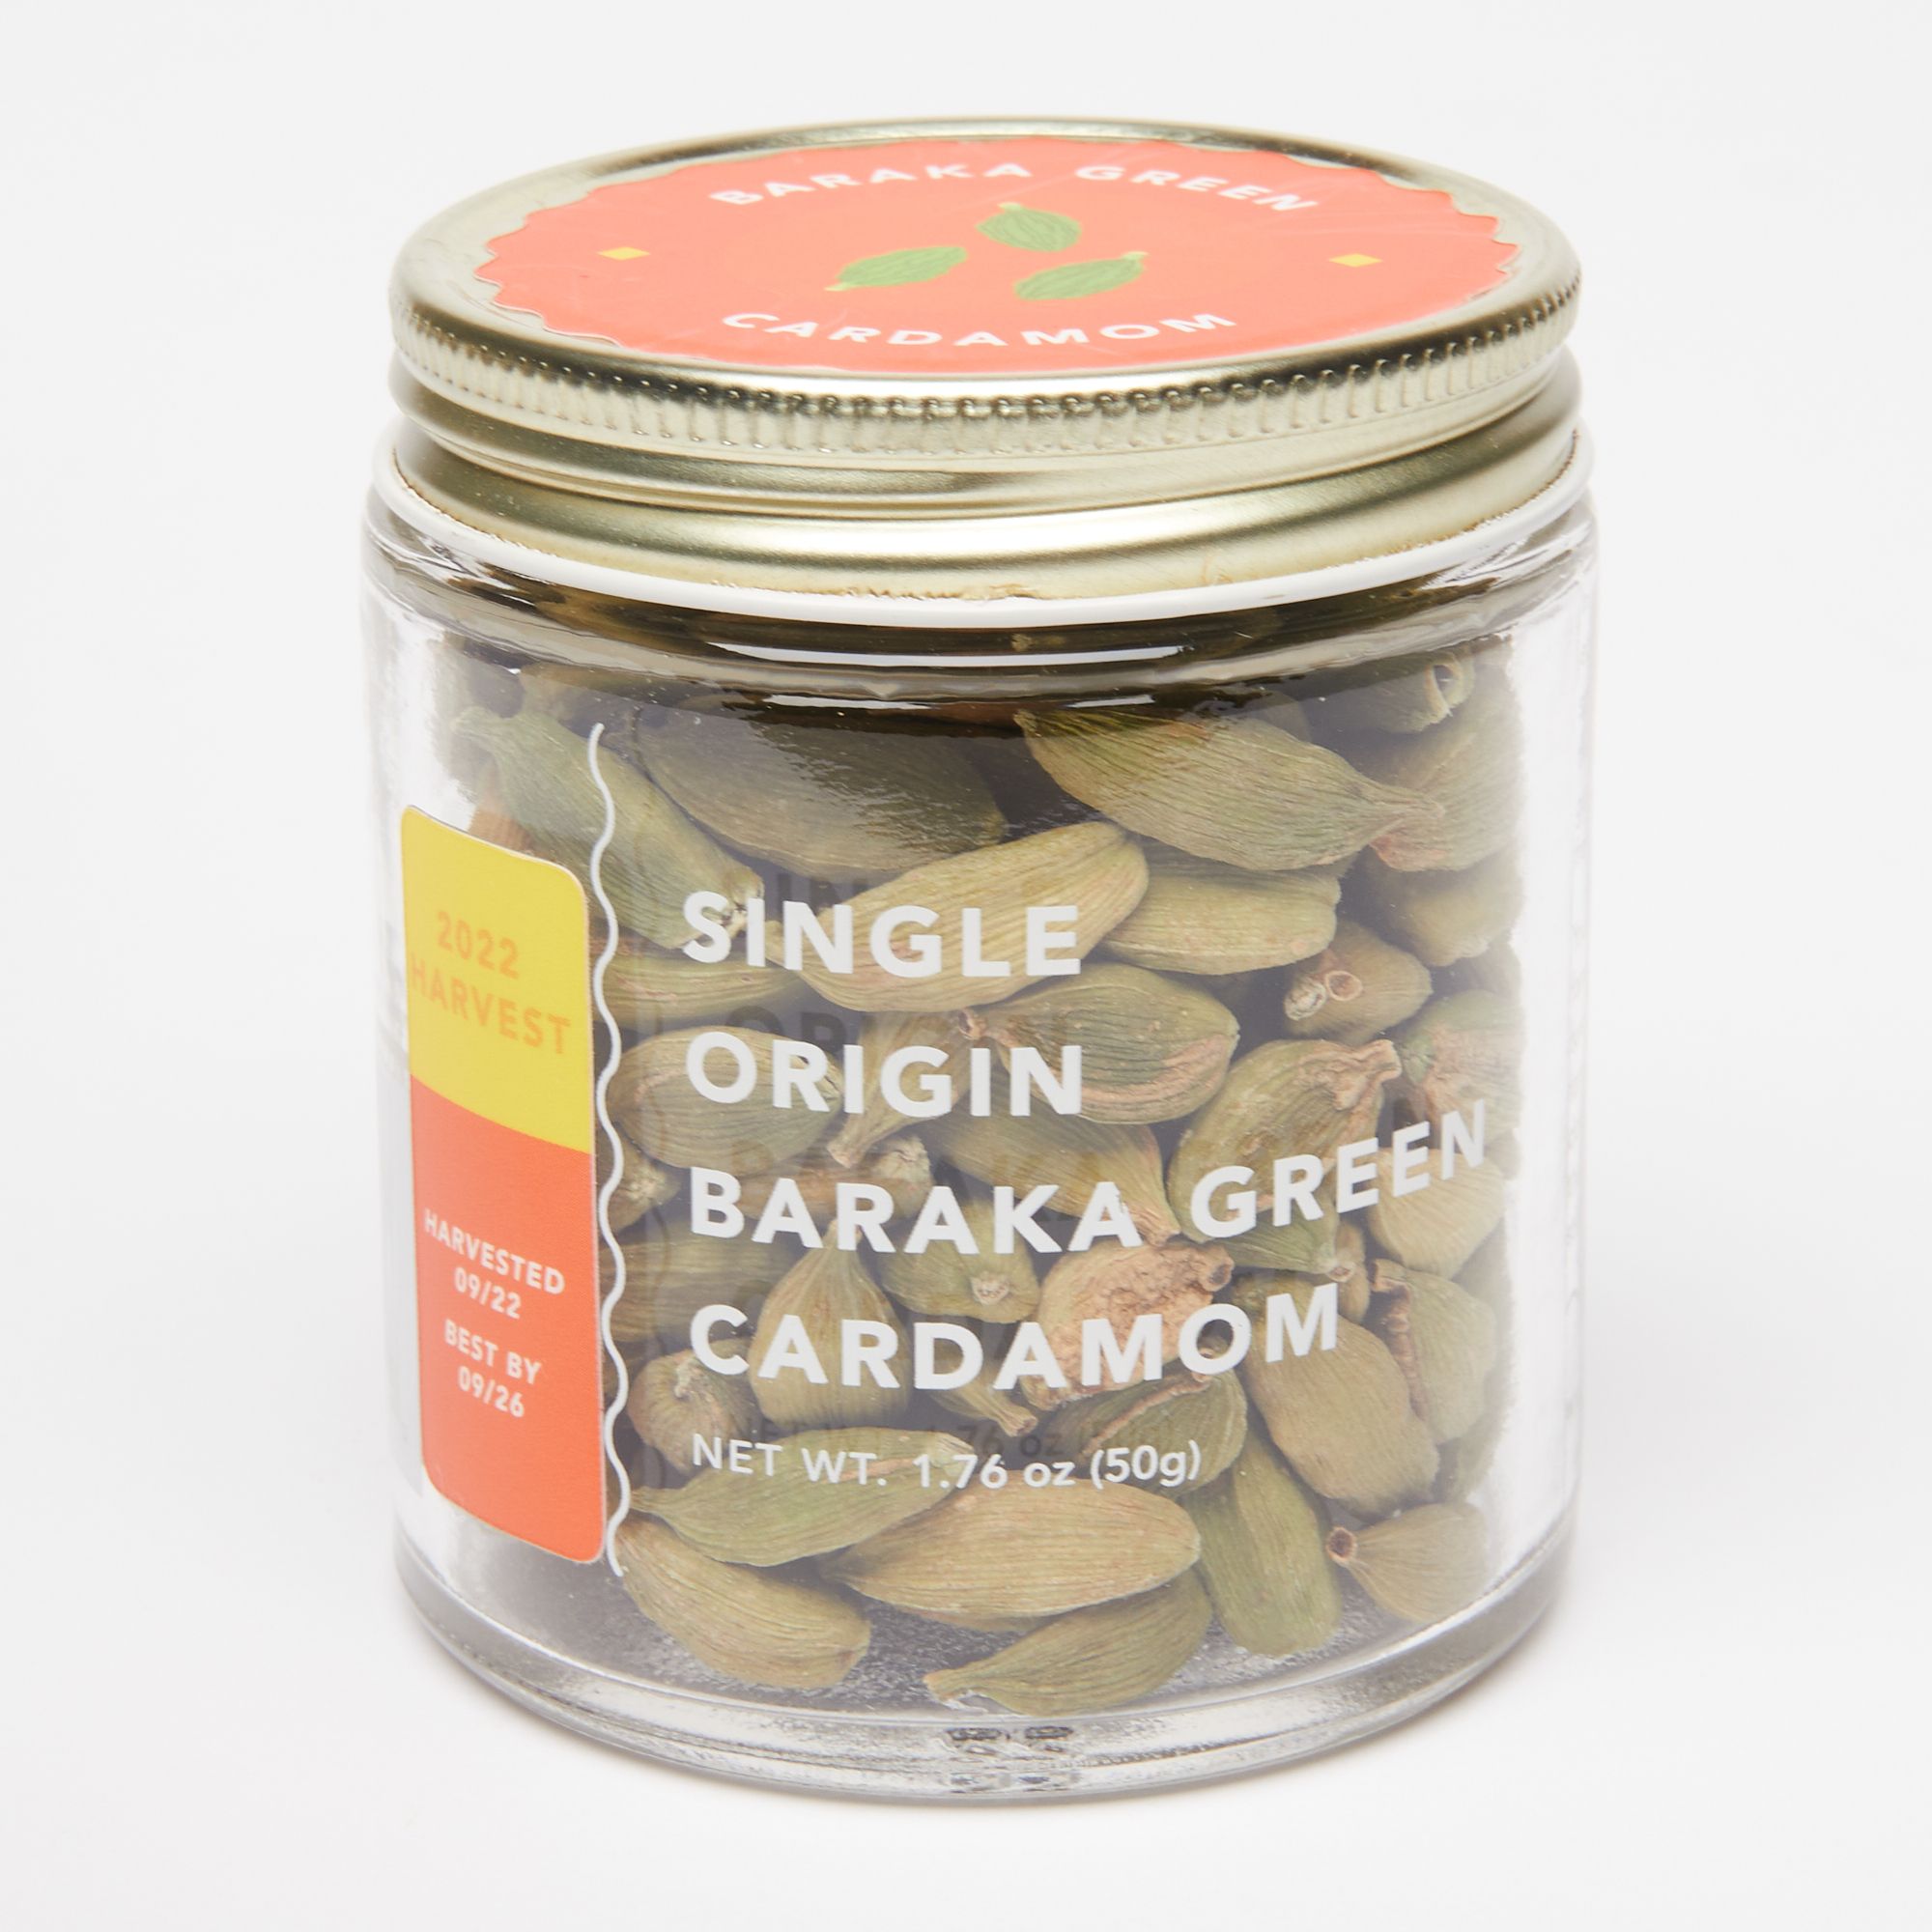 Glass jar filled with cardamom and a transparent label that reads "Single Origin Baraka Green Cardamom"